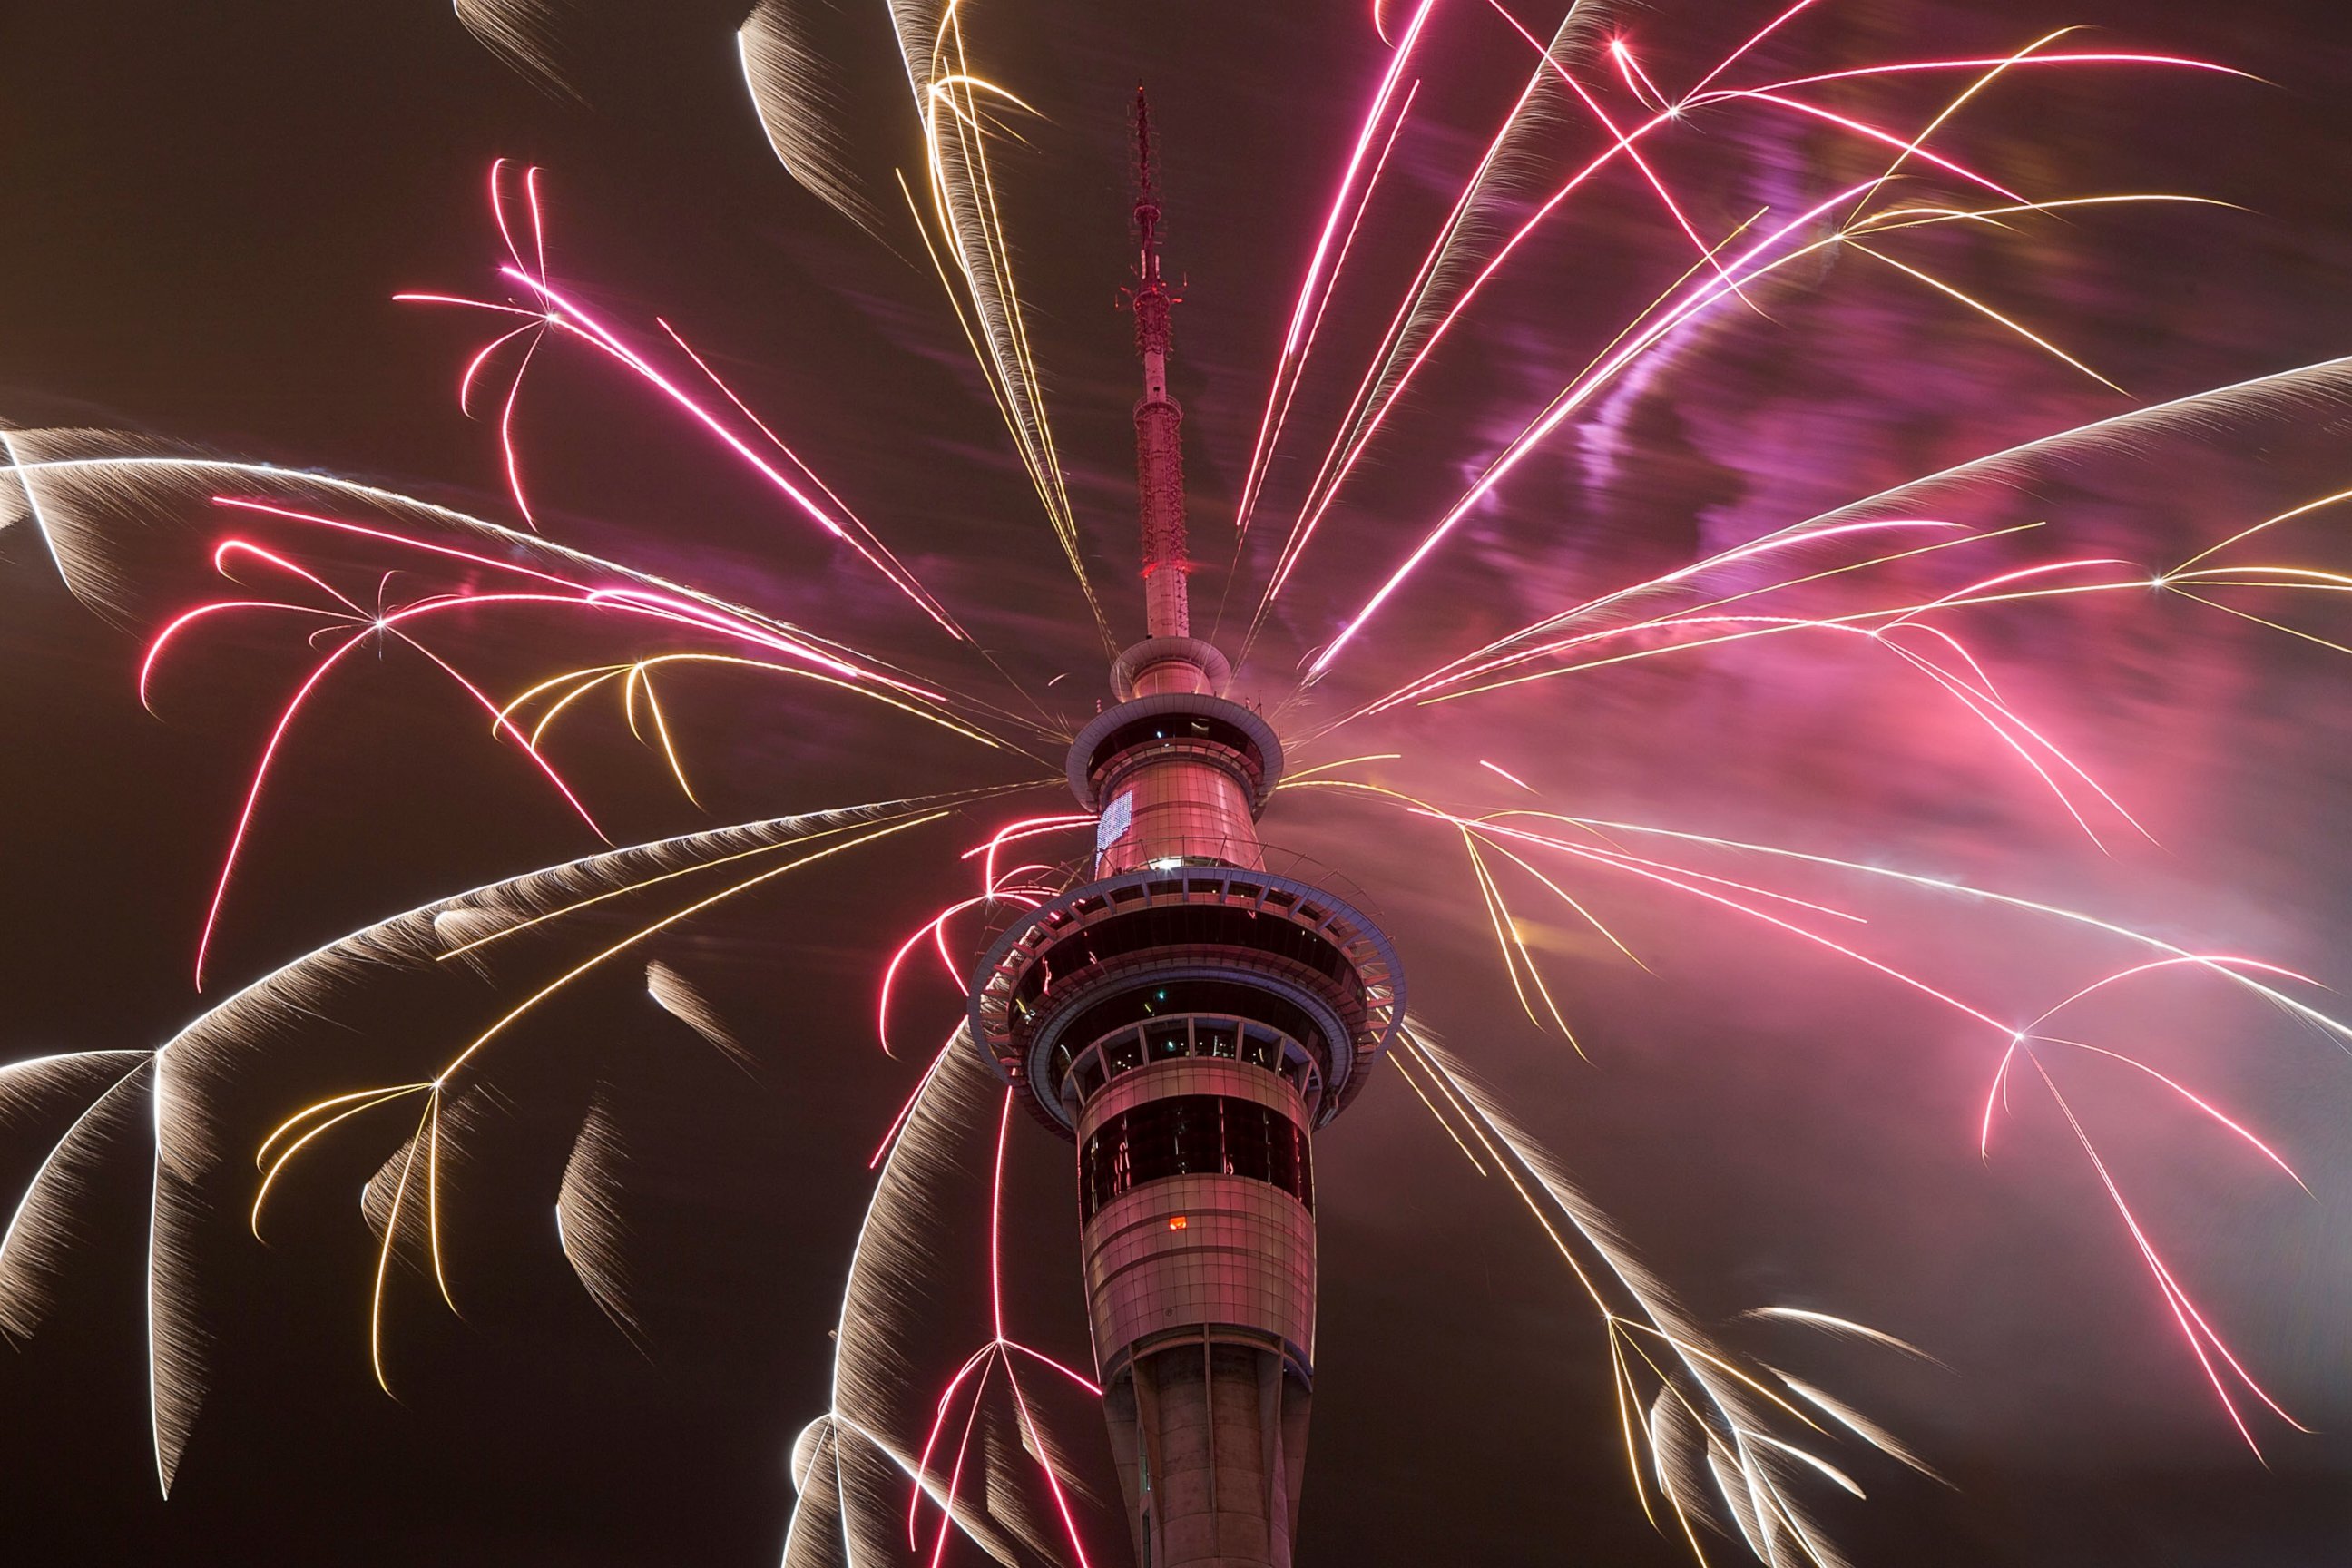 PHOTO: Firework display from the top of the Sky Tower to welcome the New Year on Jan. 1, 2015 in Auckland, New Zealand.